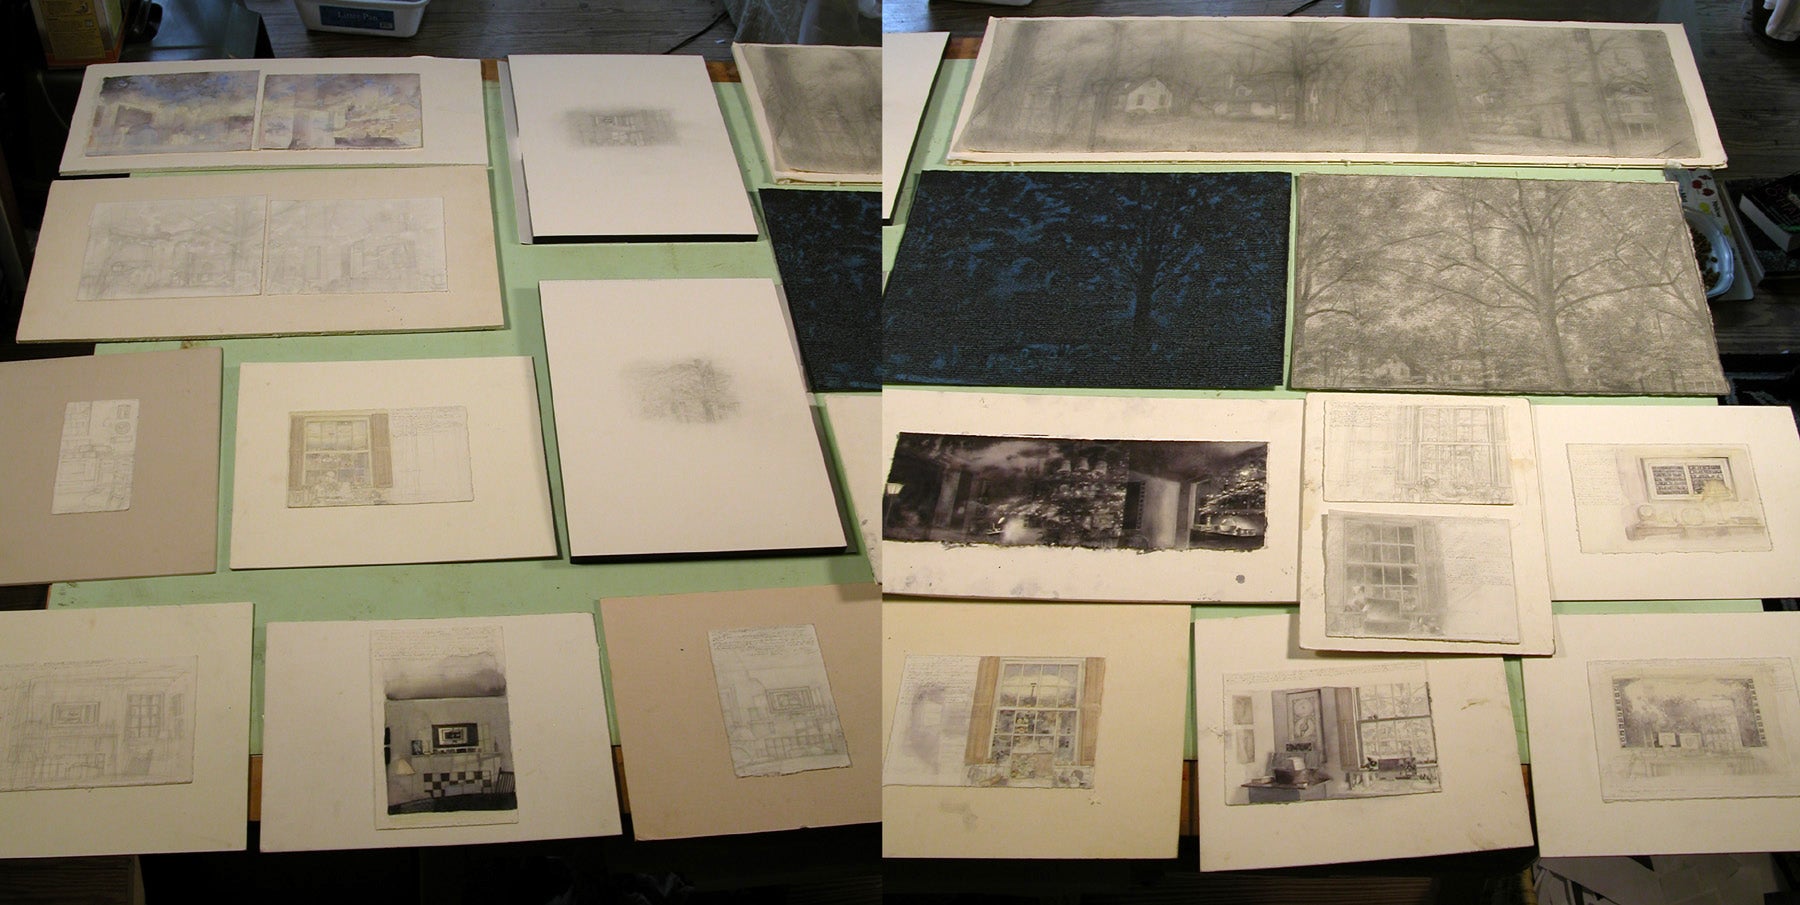 Photograph of Various Works in Progress image